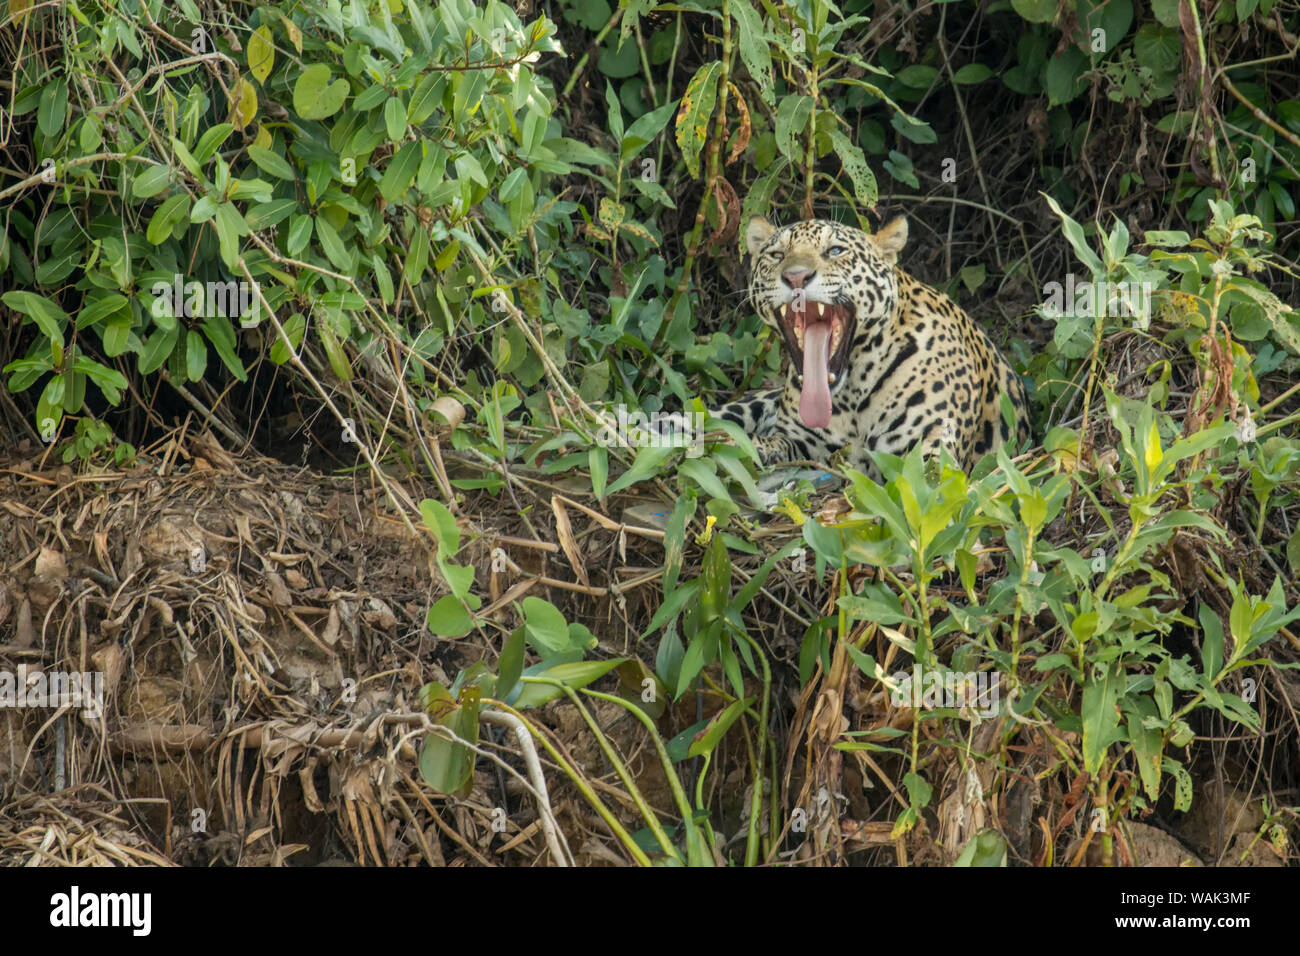 Pantanal, Mato Grosso, Brazil. Jaguar yawning as he reclines on the Cuiaba riverbank in the heat of mid-day. Stock Photo